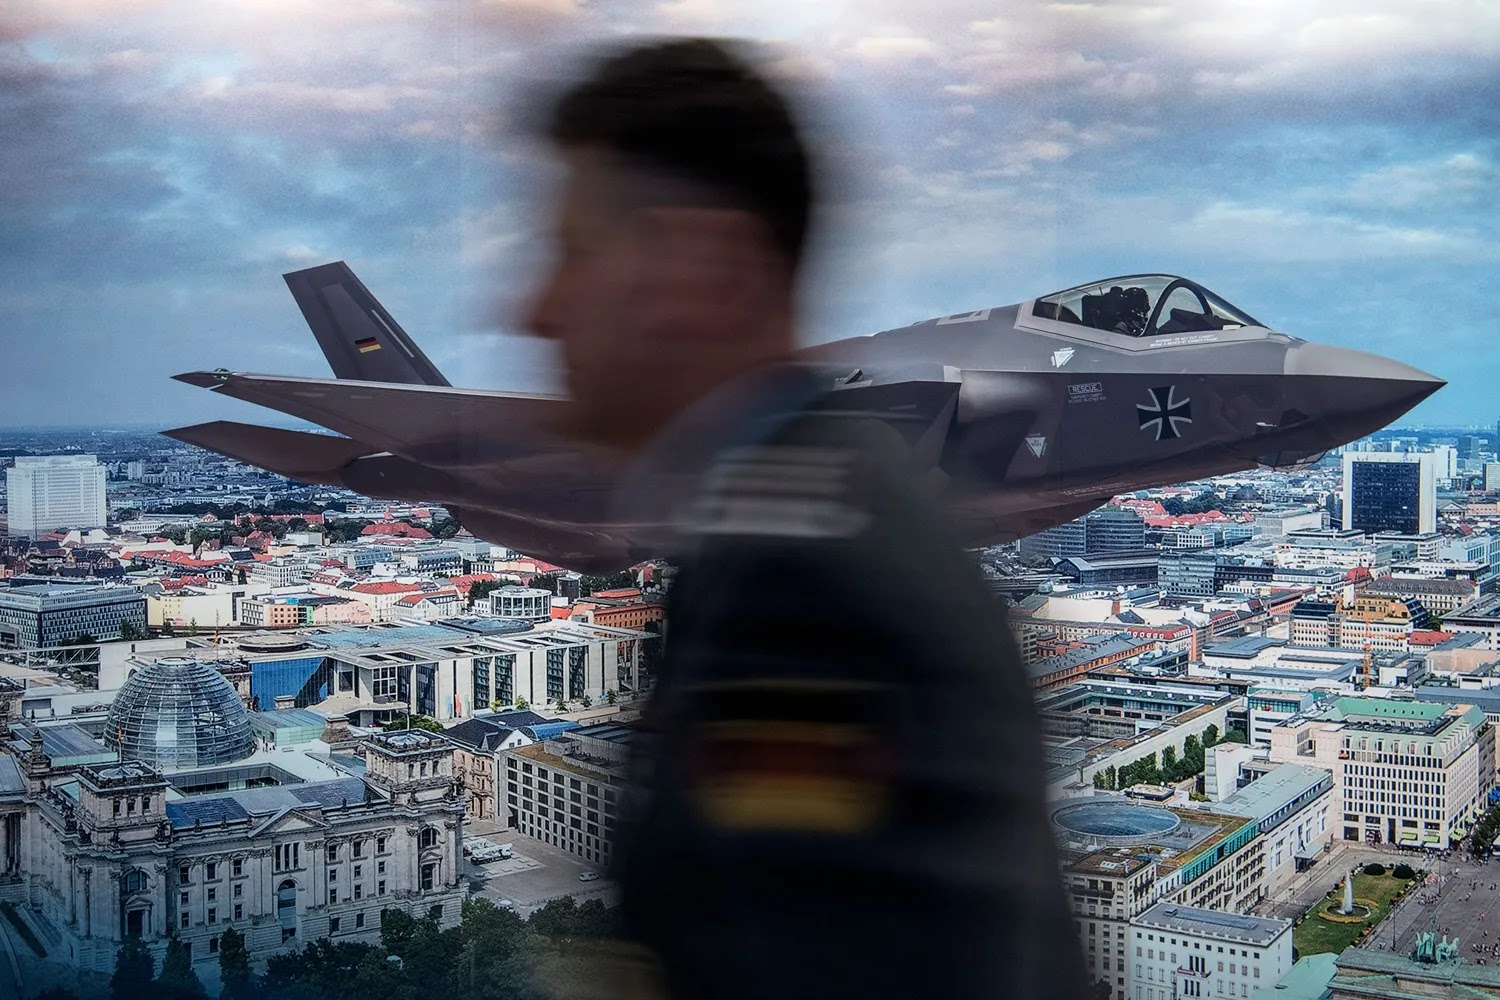 An unidentified participant walks past a poster advertising U.S. defense manufacturer Lockheed Martin’s F-35 stealth fighter over a Berlin skyline at the Berlin Security Conference in Berlin on Nov. 29, 2017.